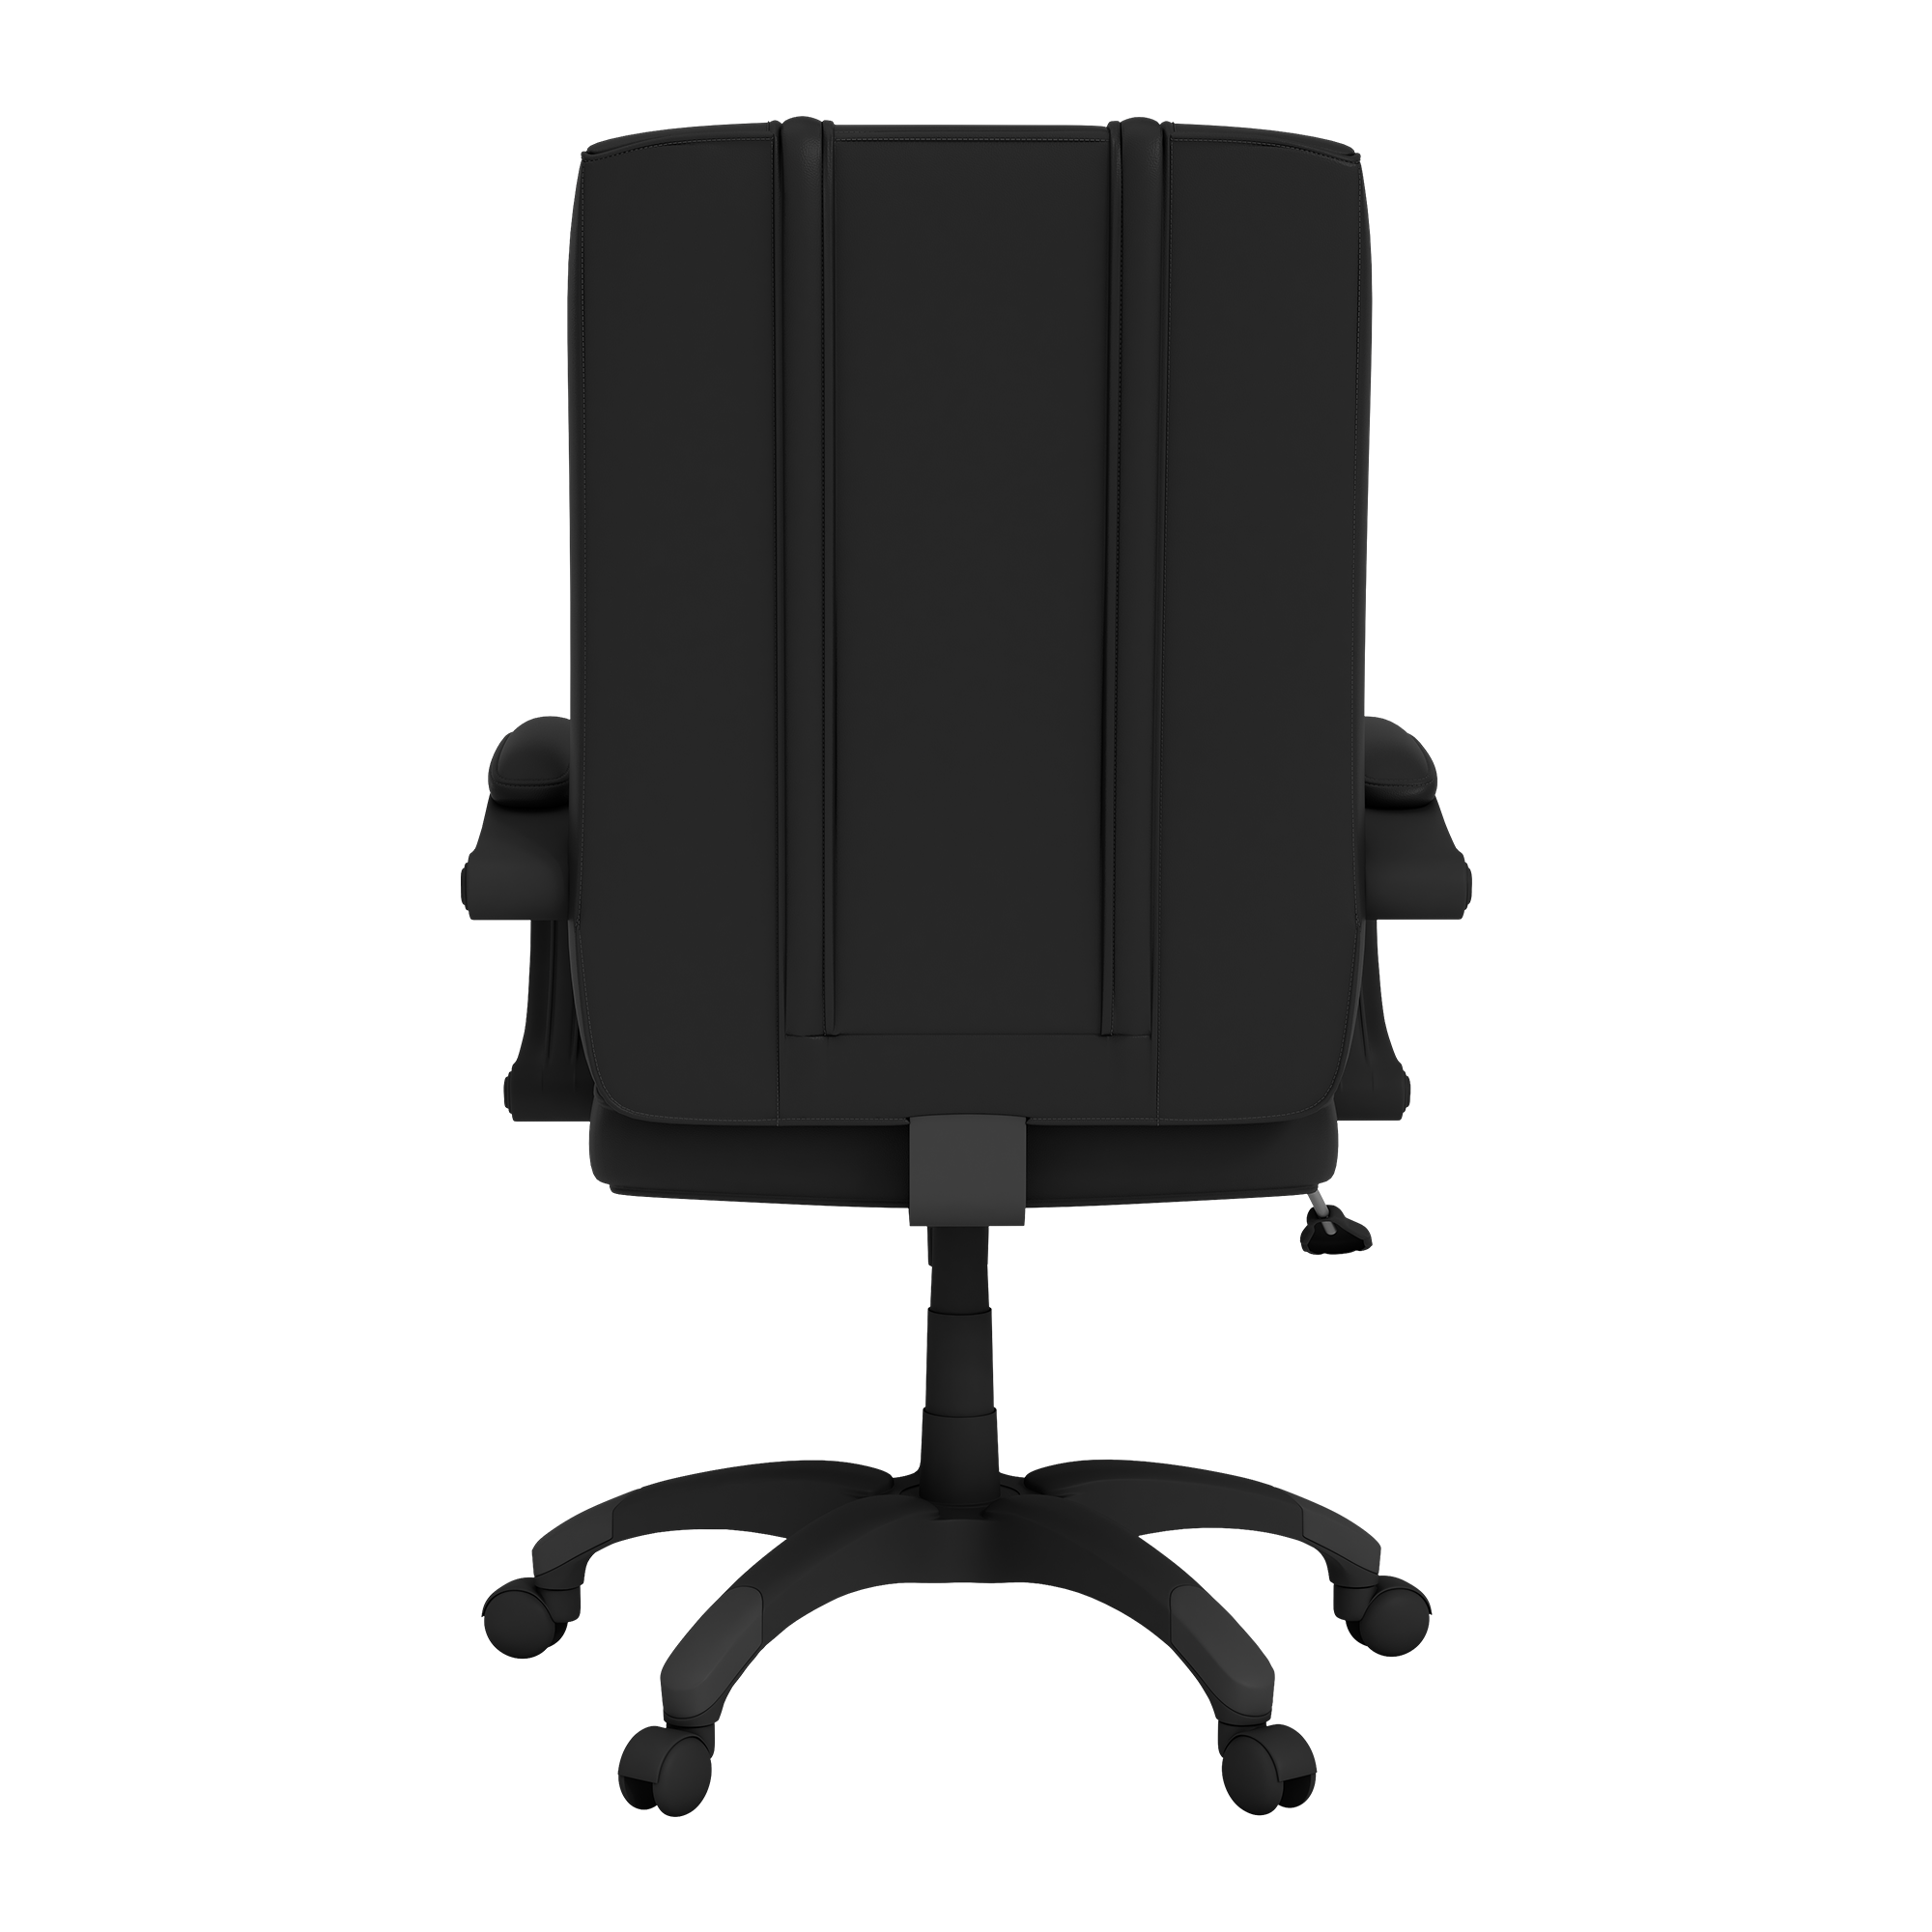 Office Chair 1000 with  Carolina Panthers Secondary Logo